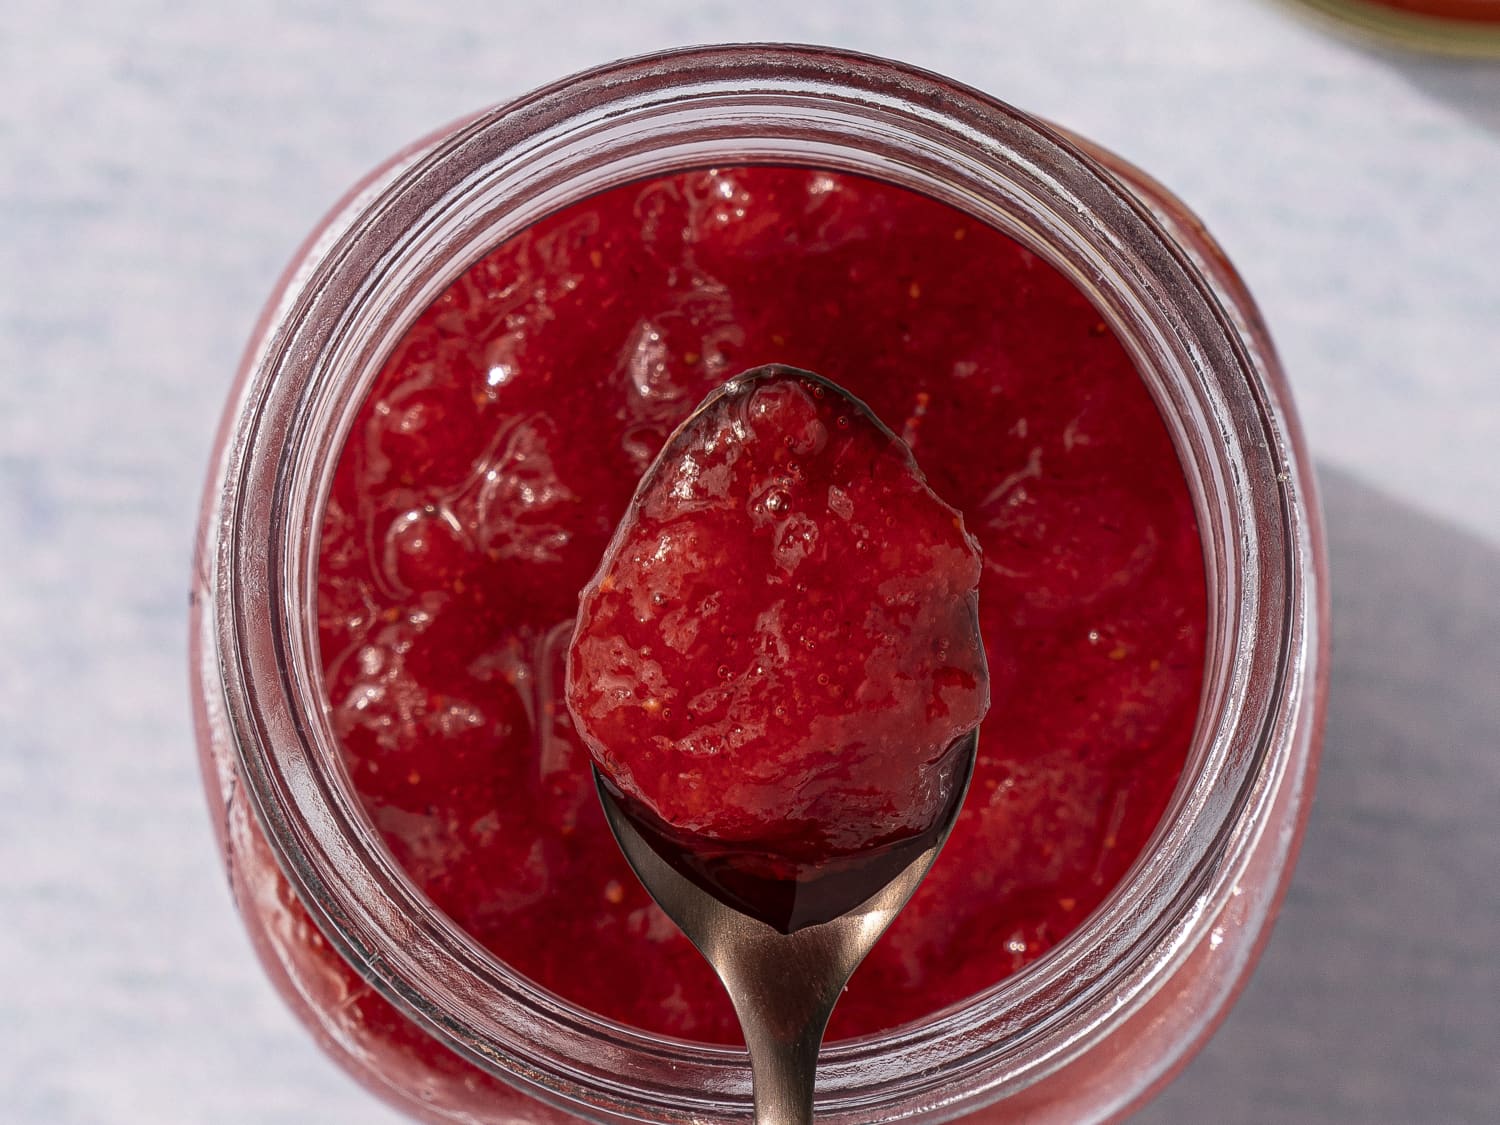 Strawberry Puree Recipe (3 Ingredients, Ready in 5 Minutes)